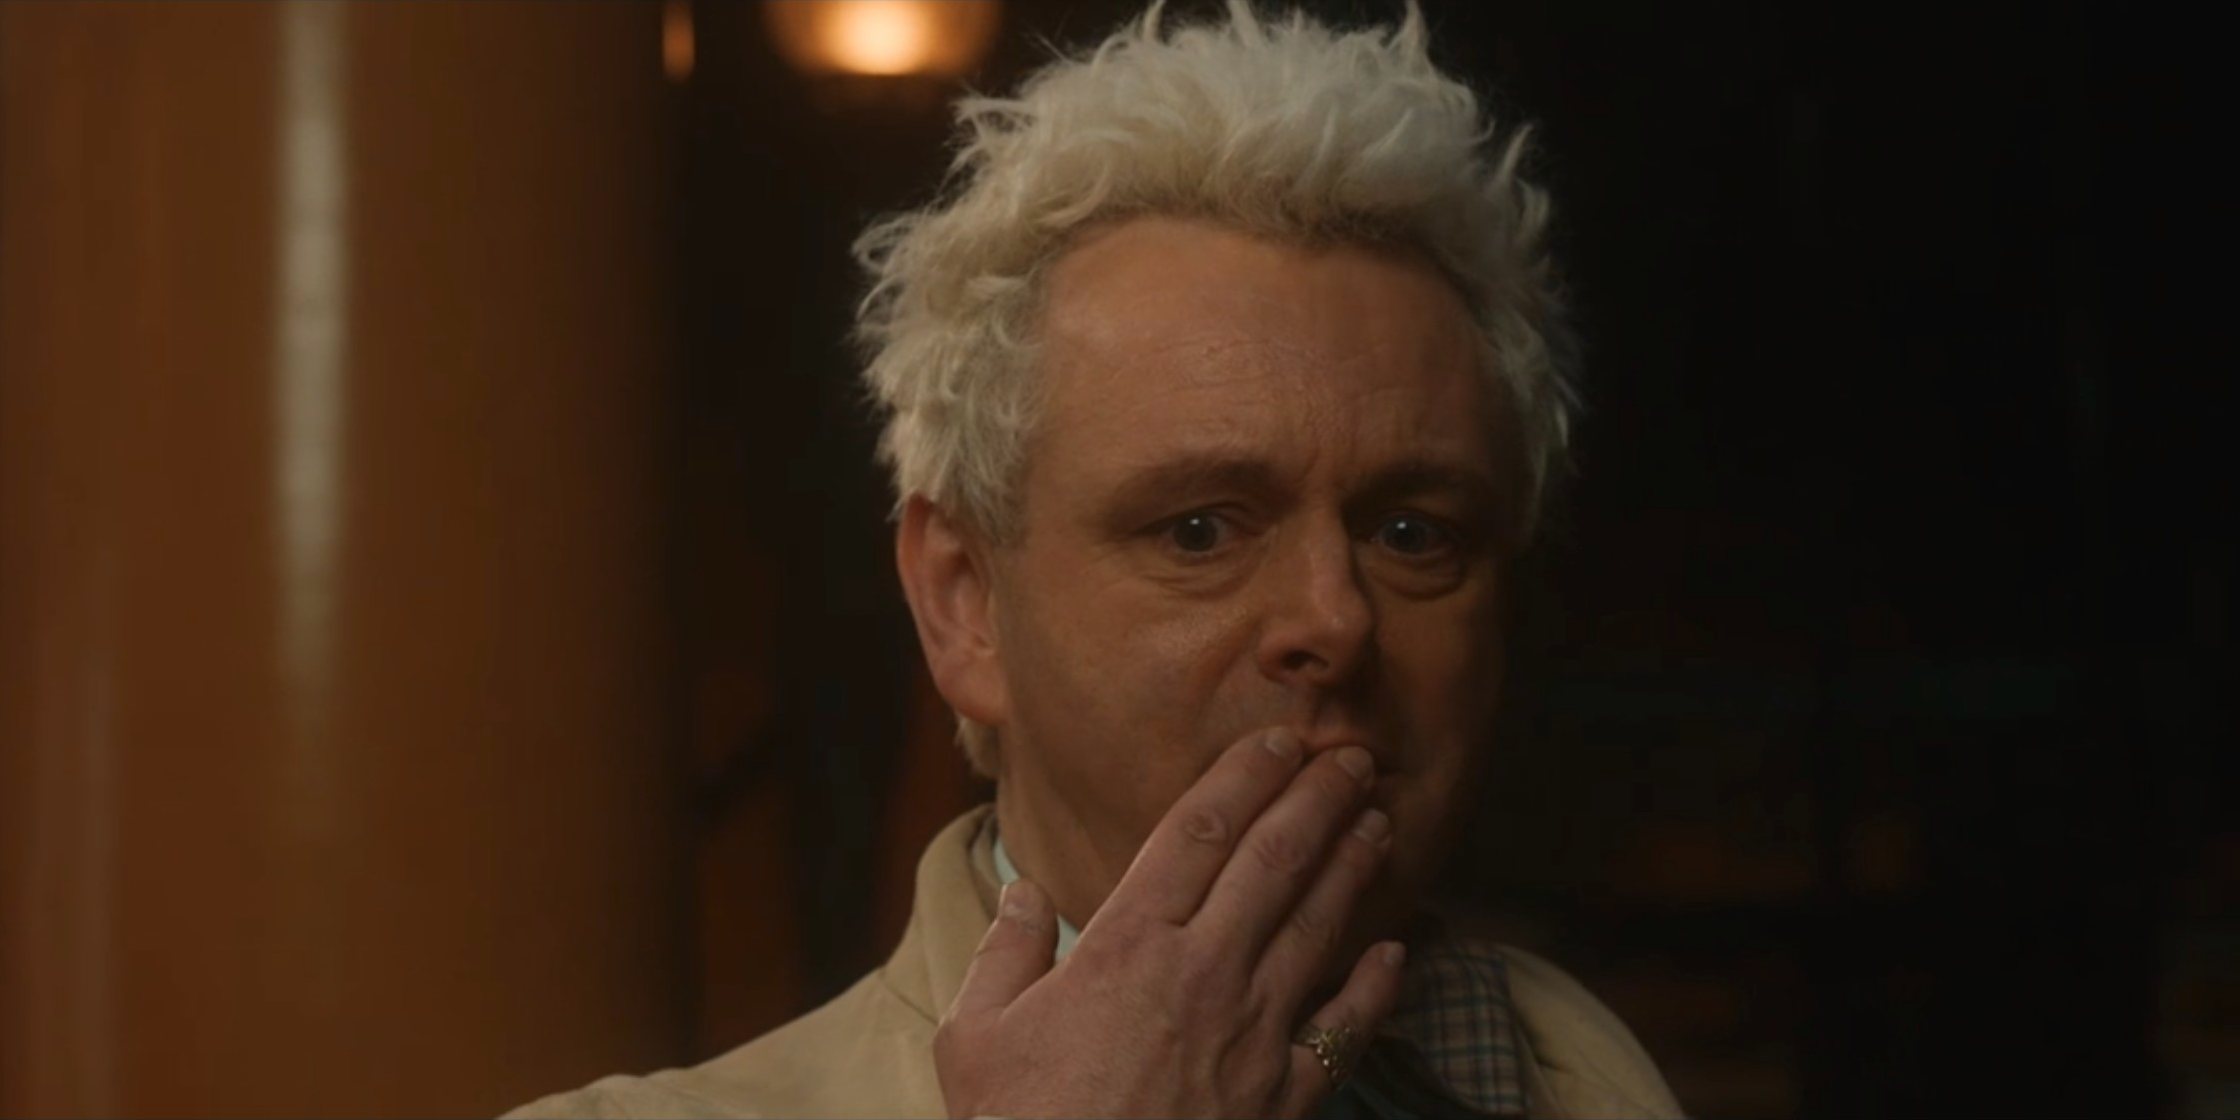 Michael Sheen as Aziraphale after the kiss in Good Omens Season 2